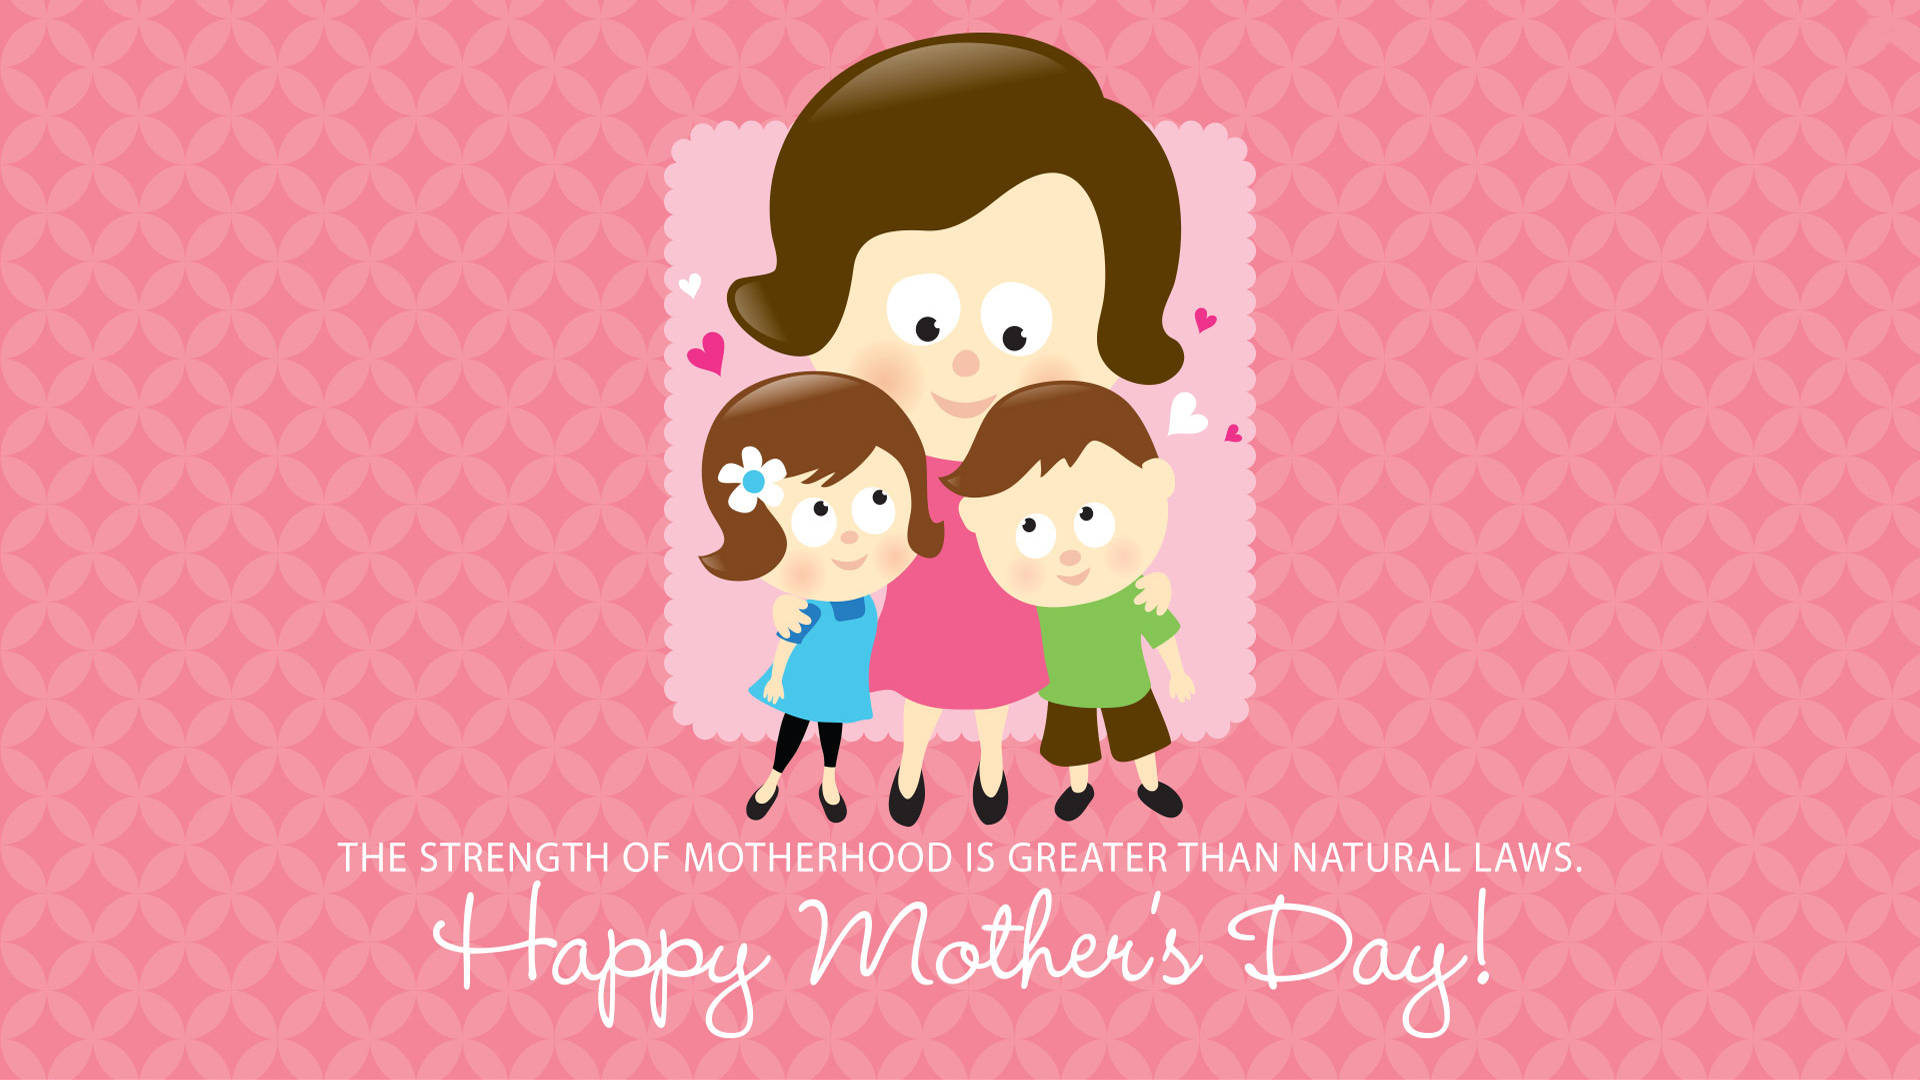 Happy Mothers Day Cartoon Art Background